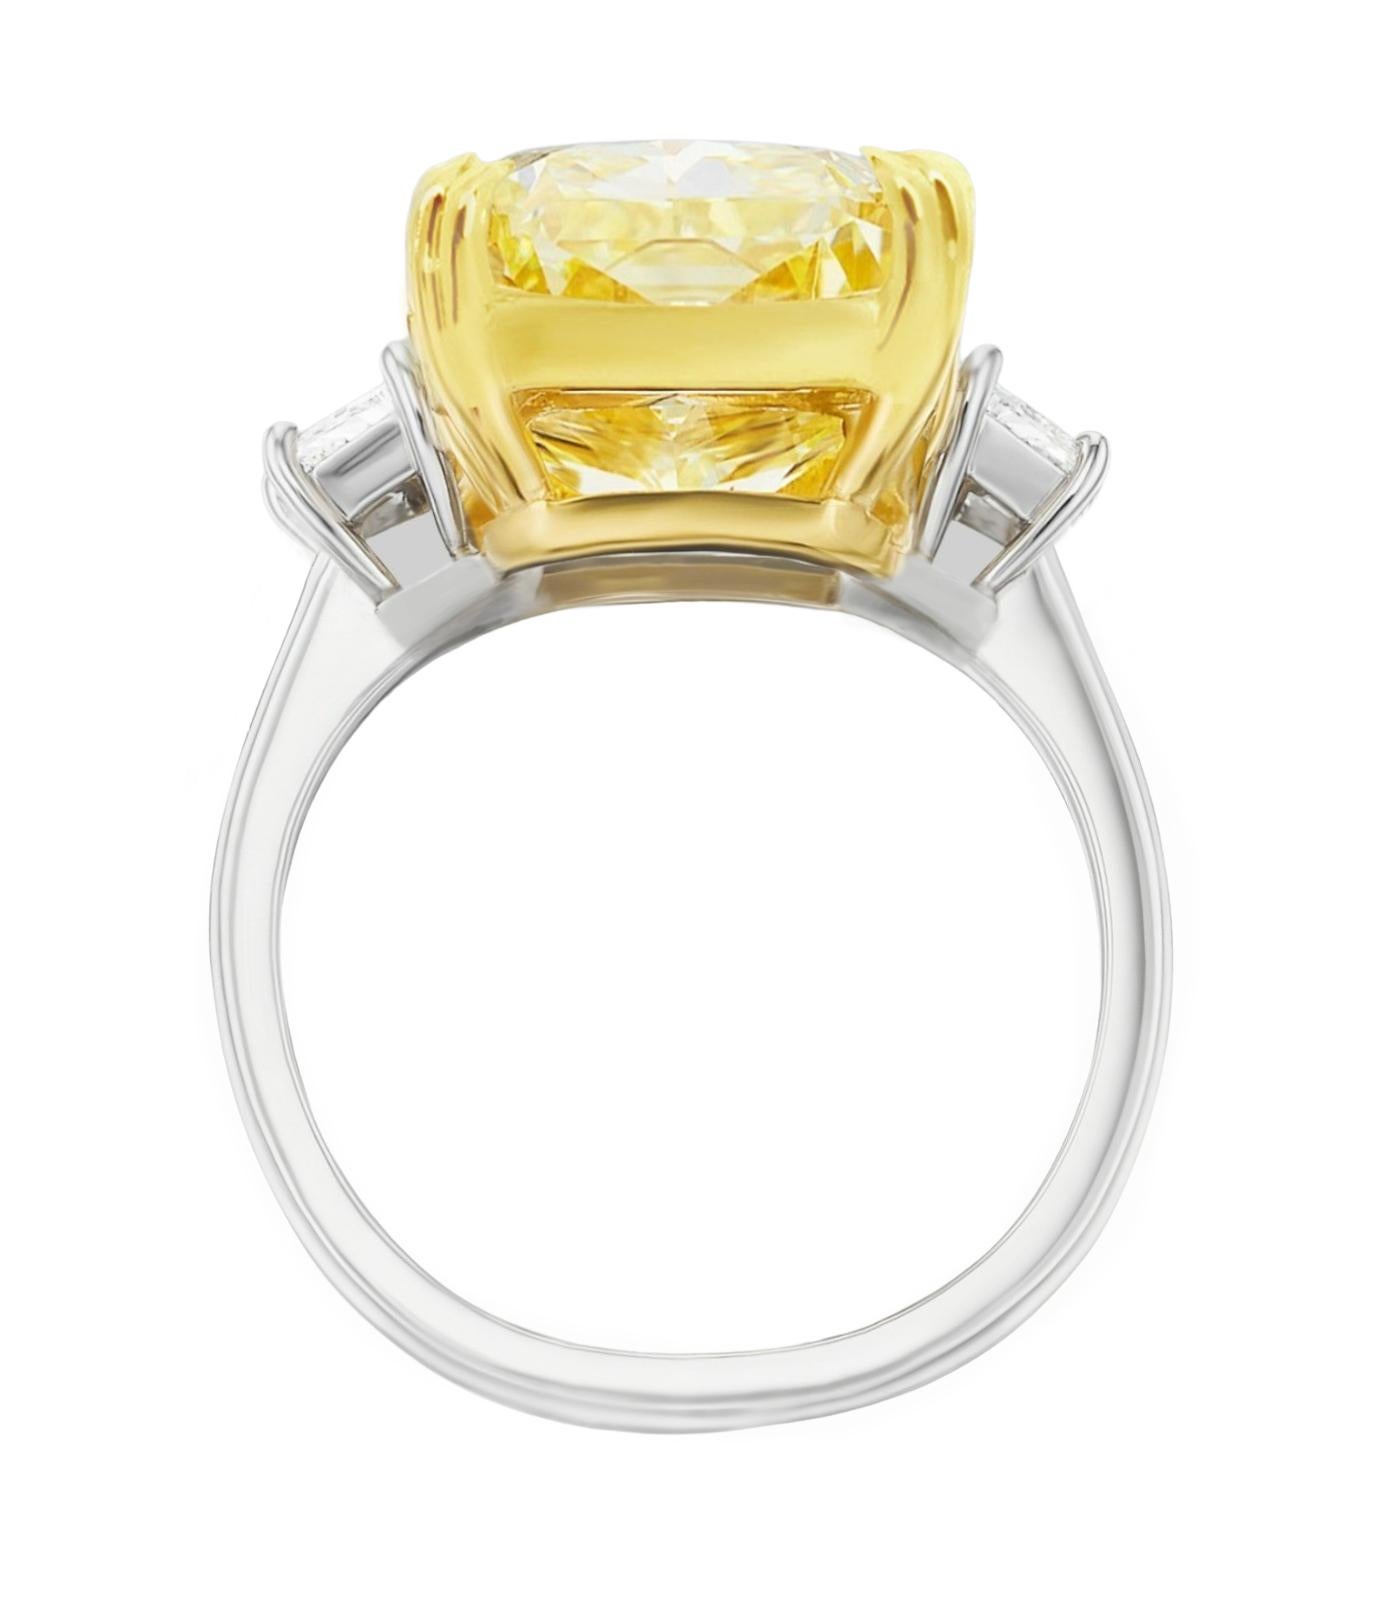 This Stunning Antinori di San Pietro ROMA GIA Certified 10.35 Carat Fancy Yellow Diamond is made in 18K white and Yellow Gold. The 2 white diamond trapezoid on either side of the center stone are 100% eye clean and full of brilliance. 
VVS2 Clarity